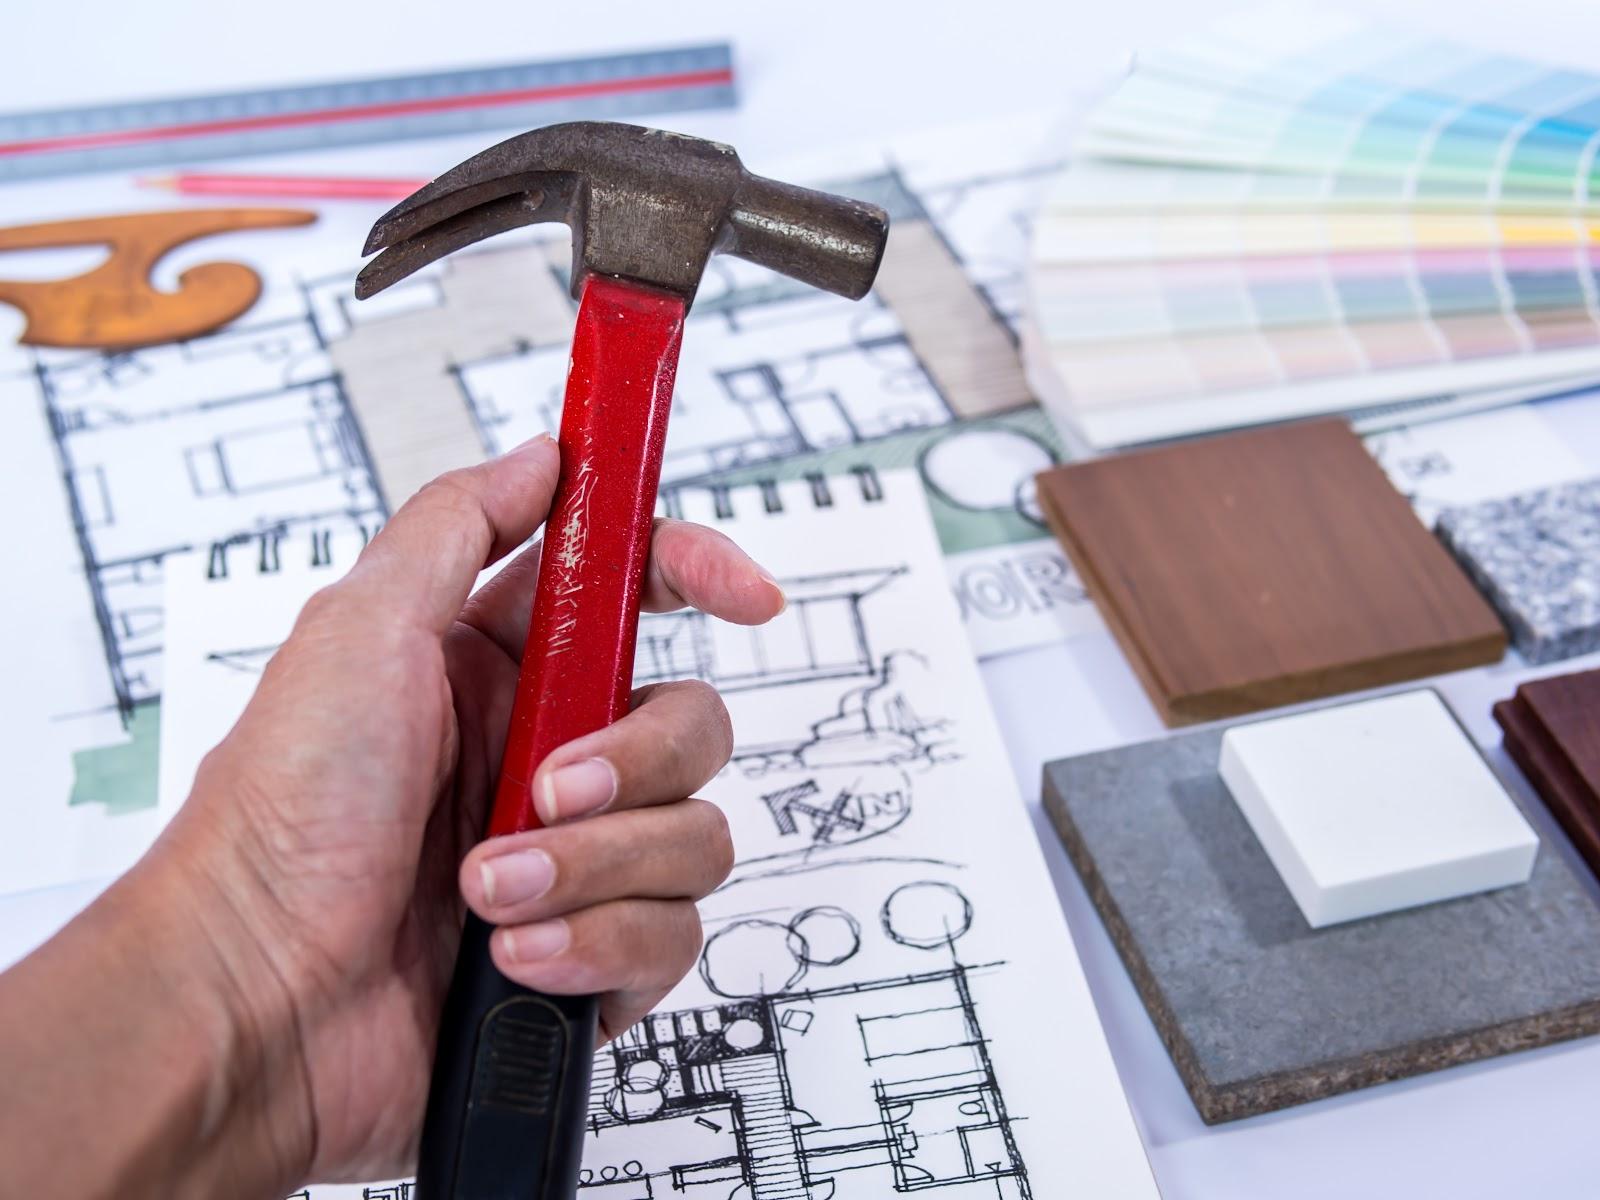 What are some common mistakes to avoid when remodeling a home?